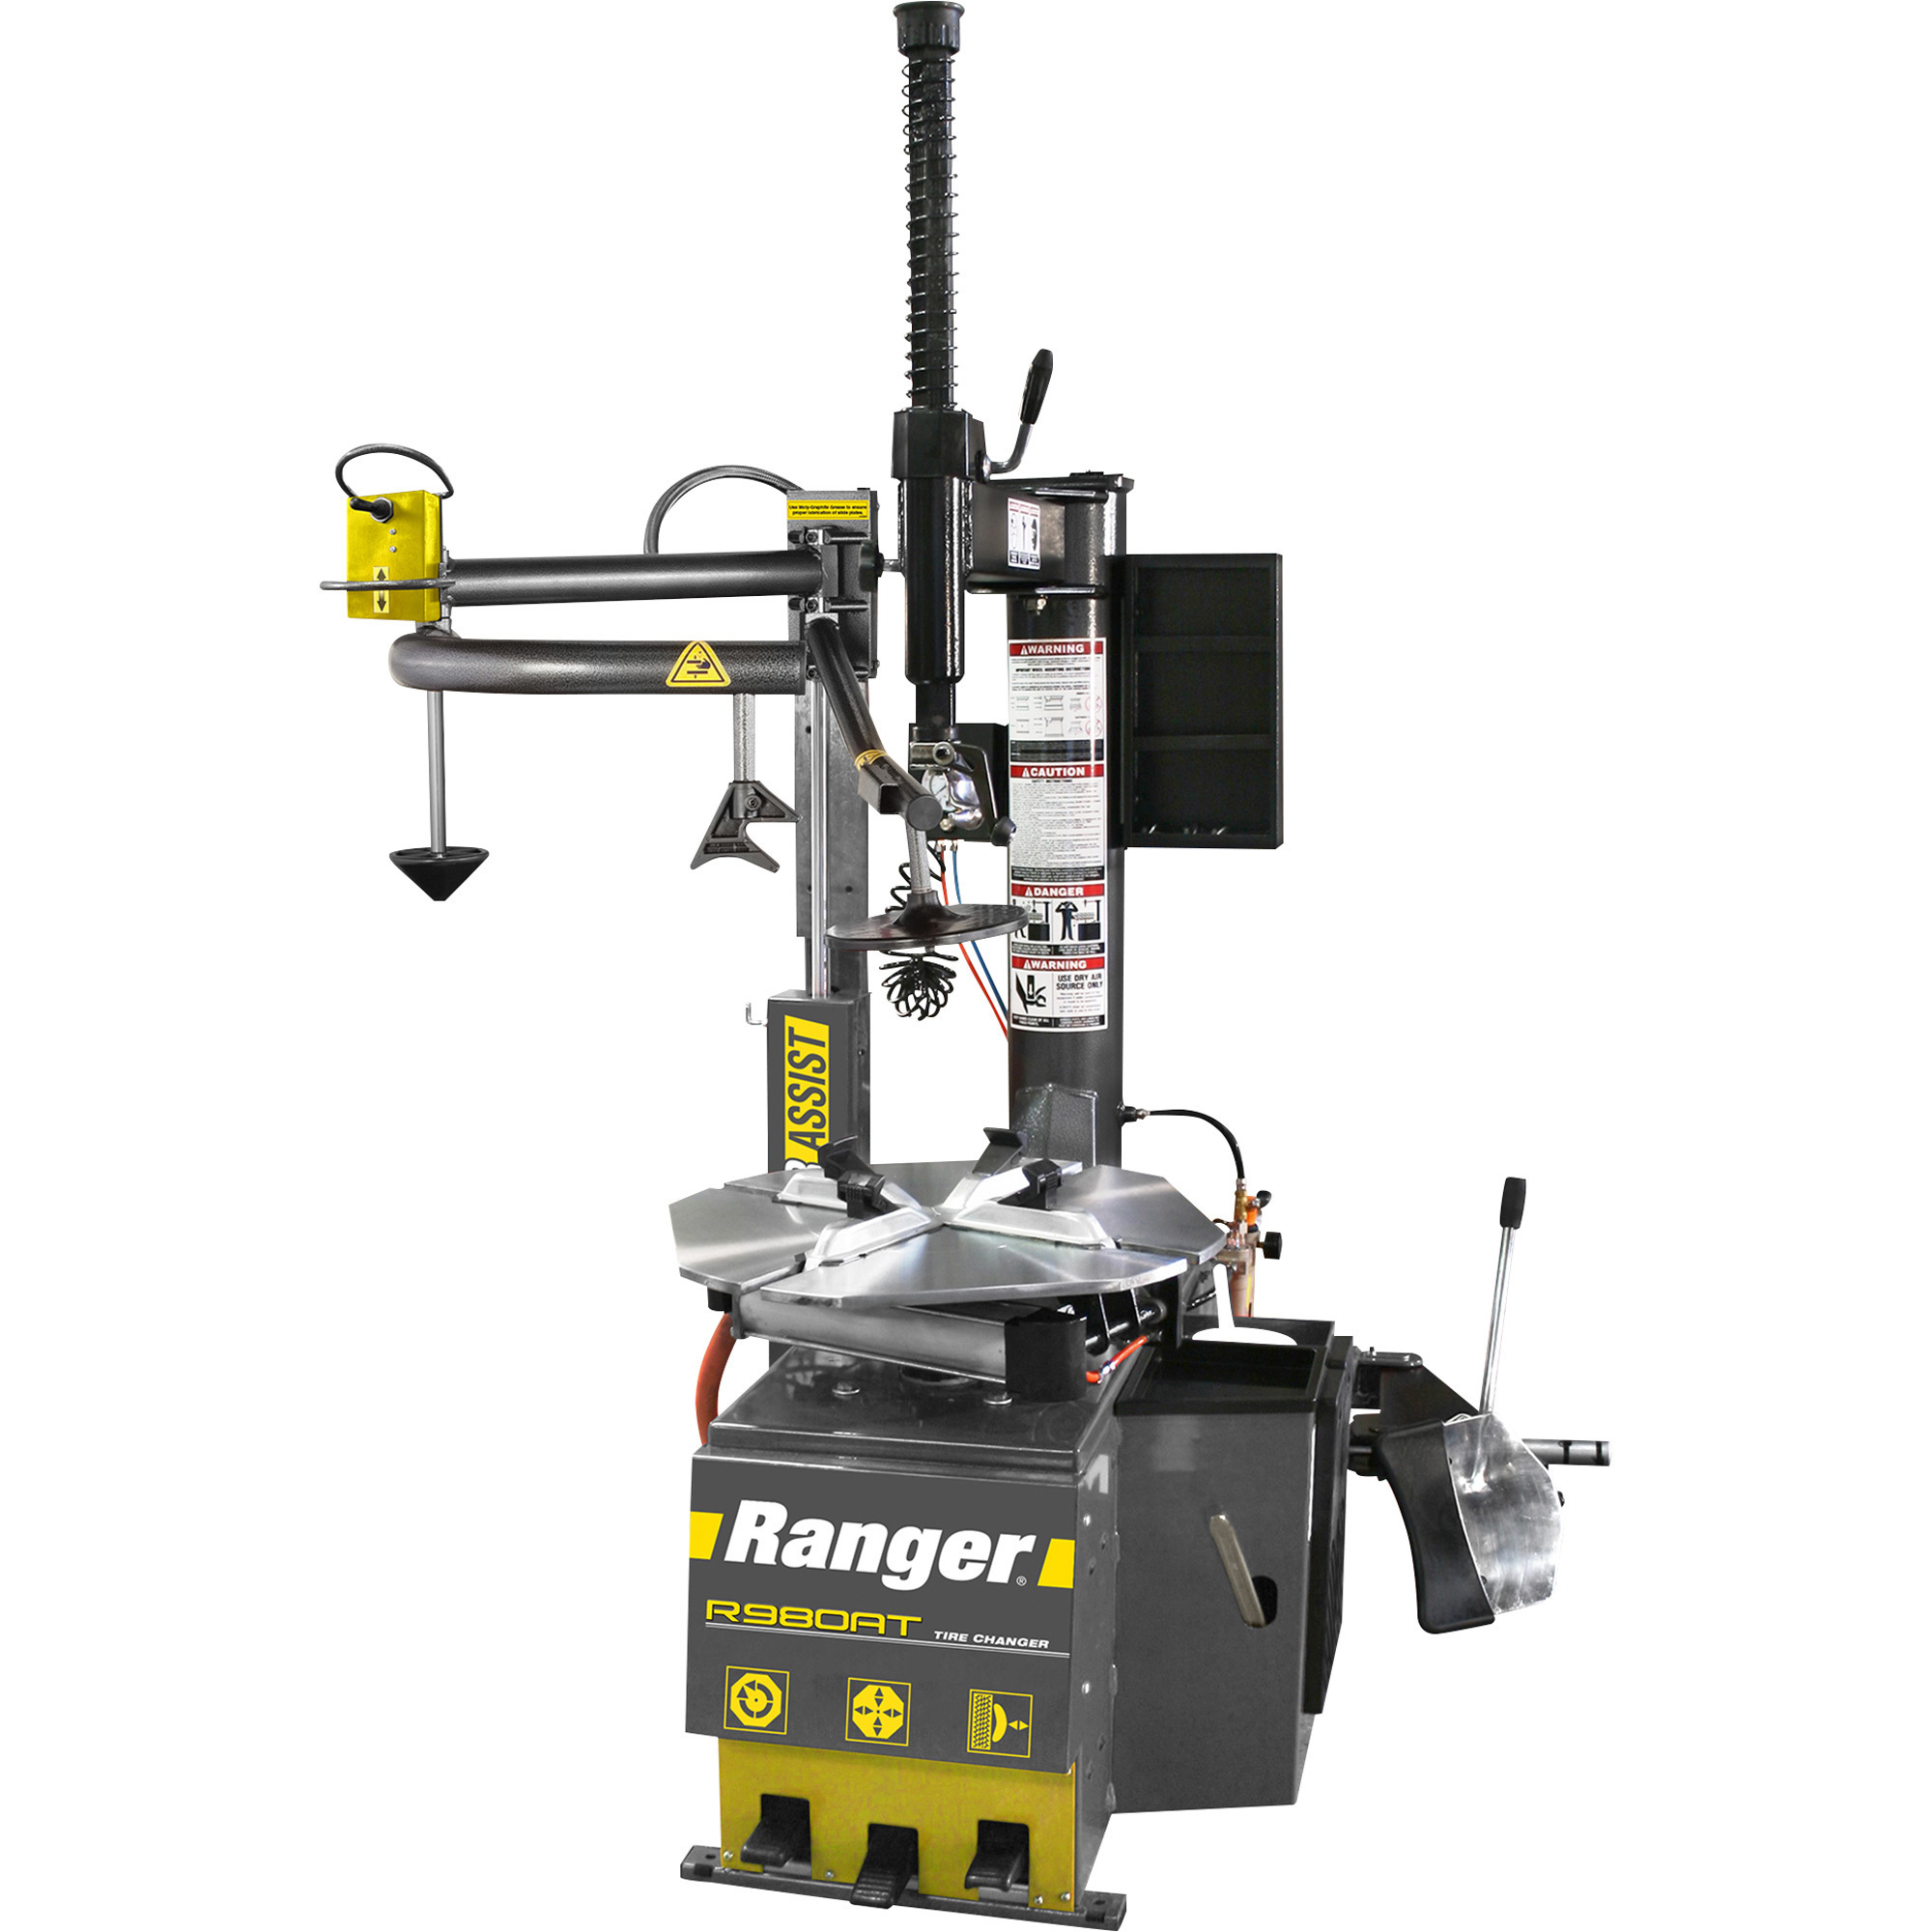 Ranger Tire Changer with Power Assist Tower, 140-465 PSI, Model R980AT